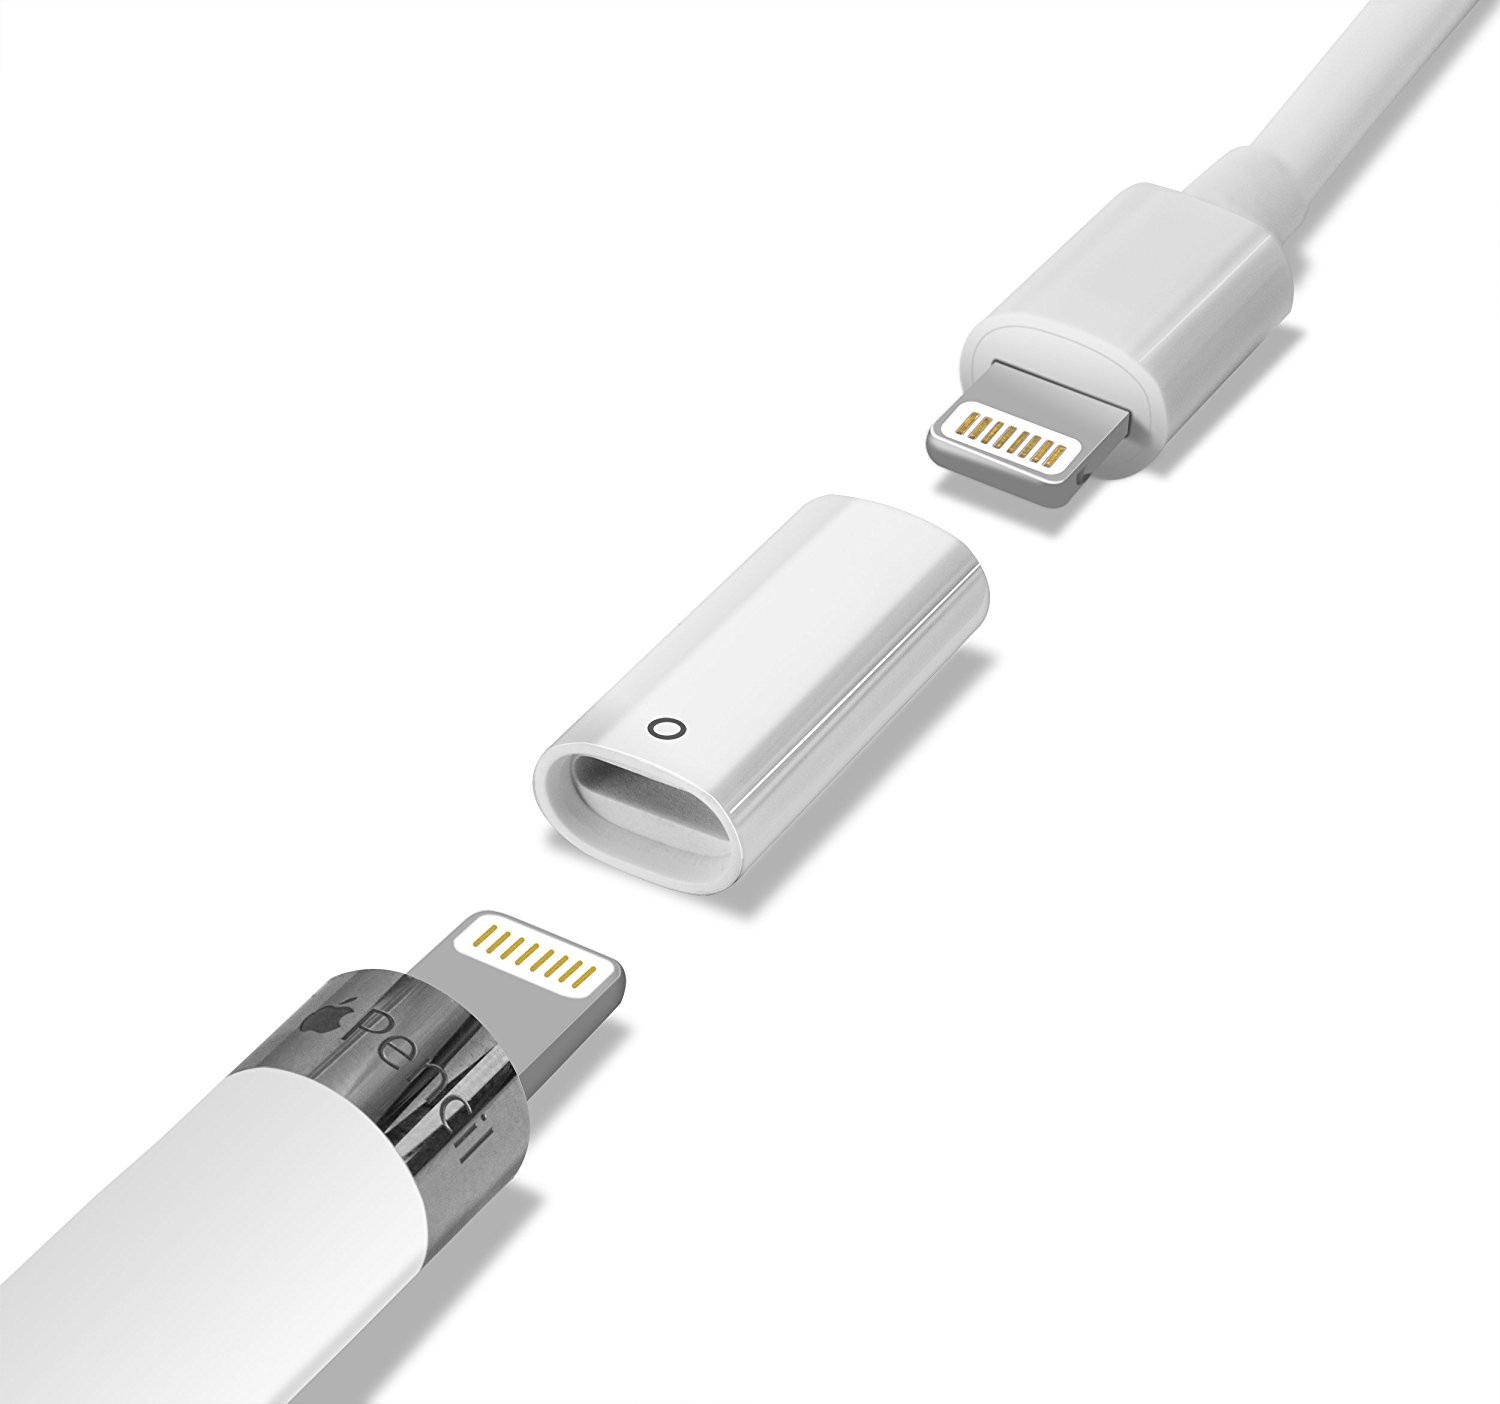 $ - Apple Pencil Charging Adapter - Female to Female Lightning -  Tinkersphere